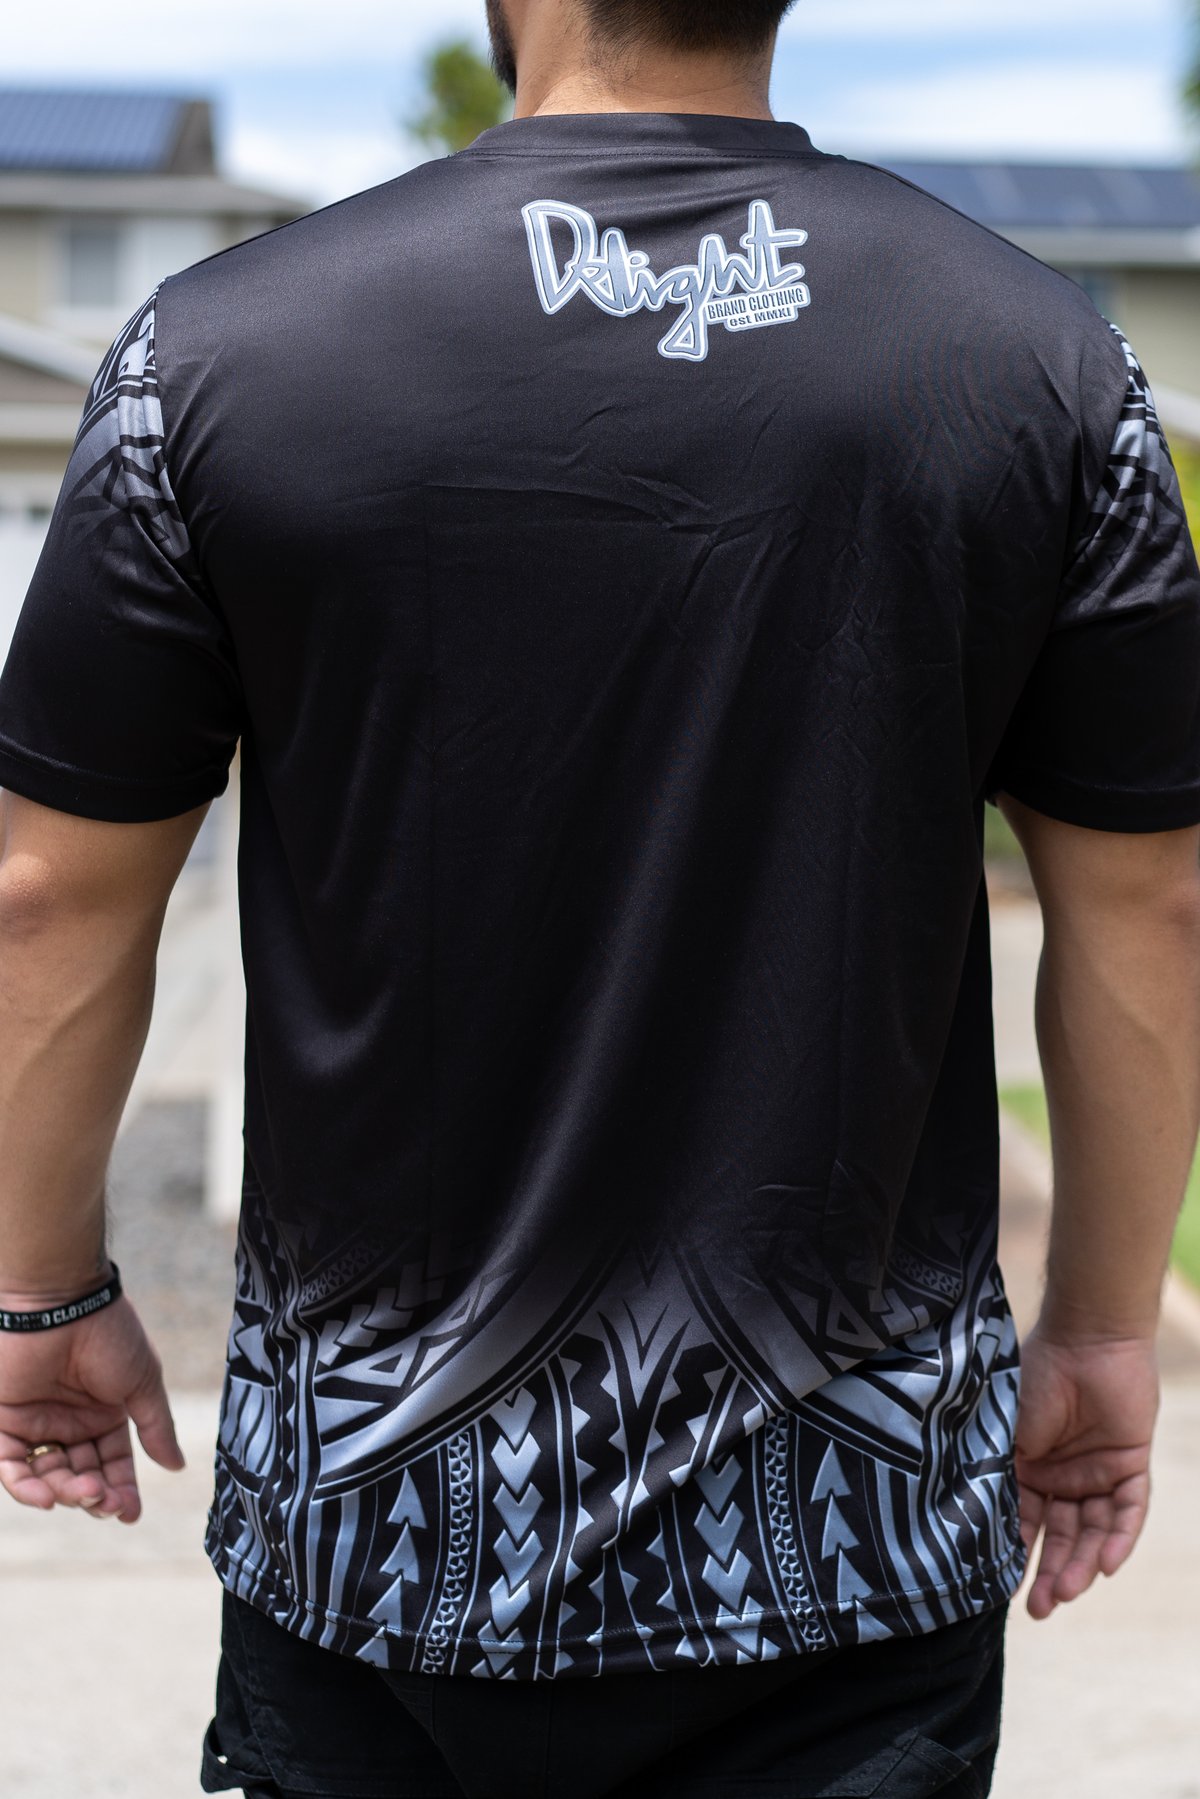 Locals and Natives Jersey (Black/Silver Tribal)